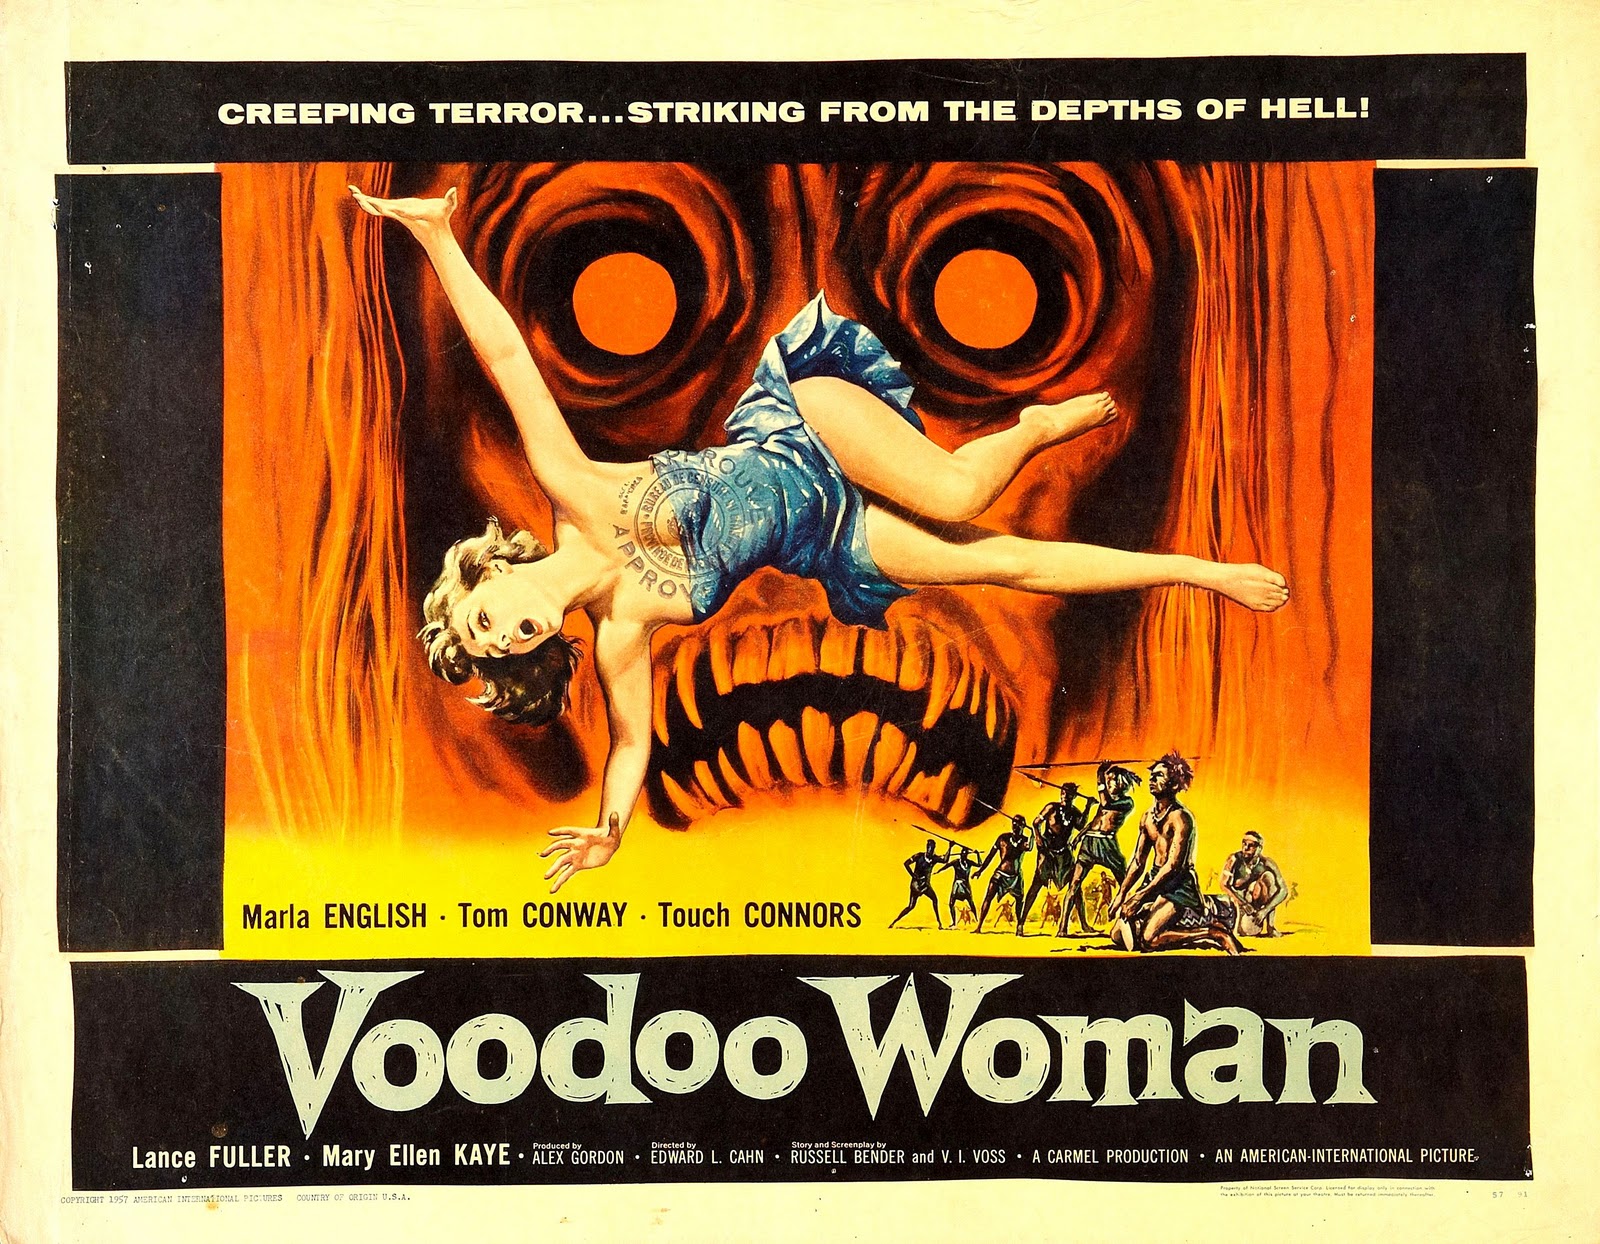 voodoo, halloween, movie, voodoo woman, creepy, horror, occult, scary, spooky, witch